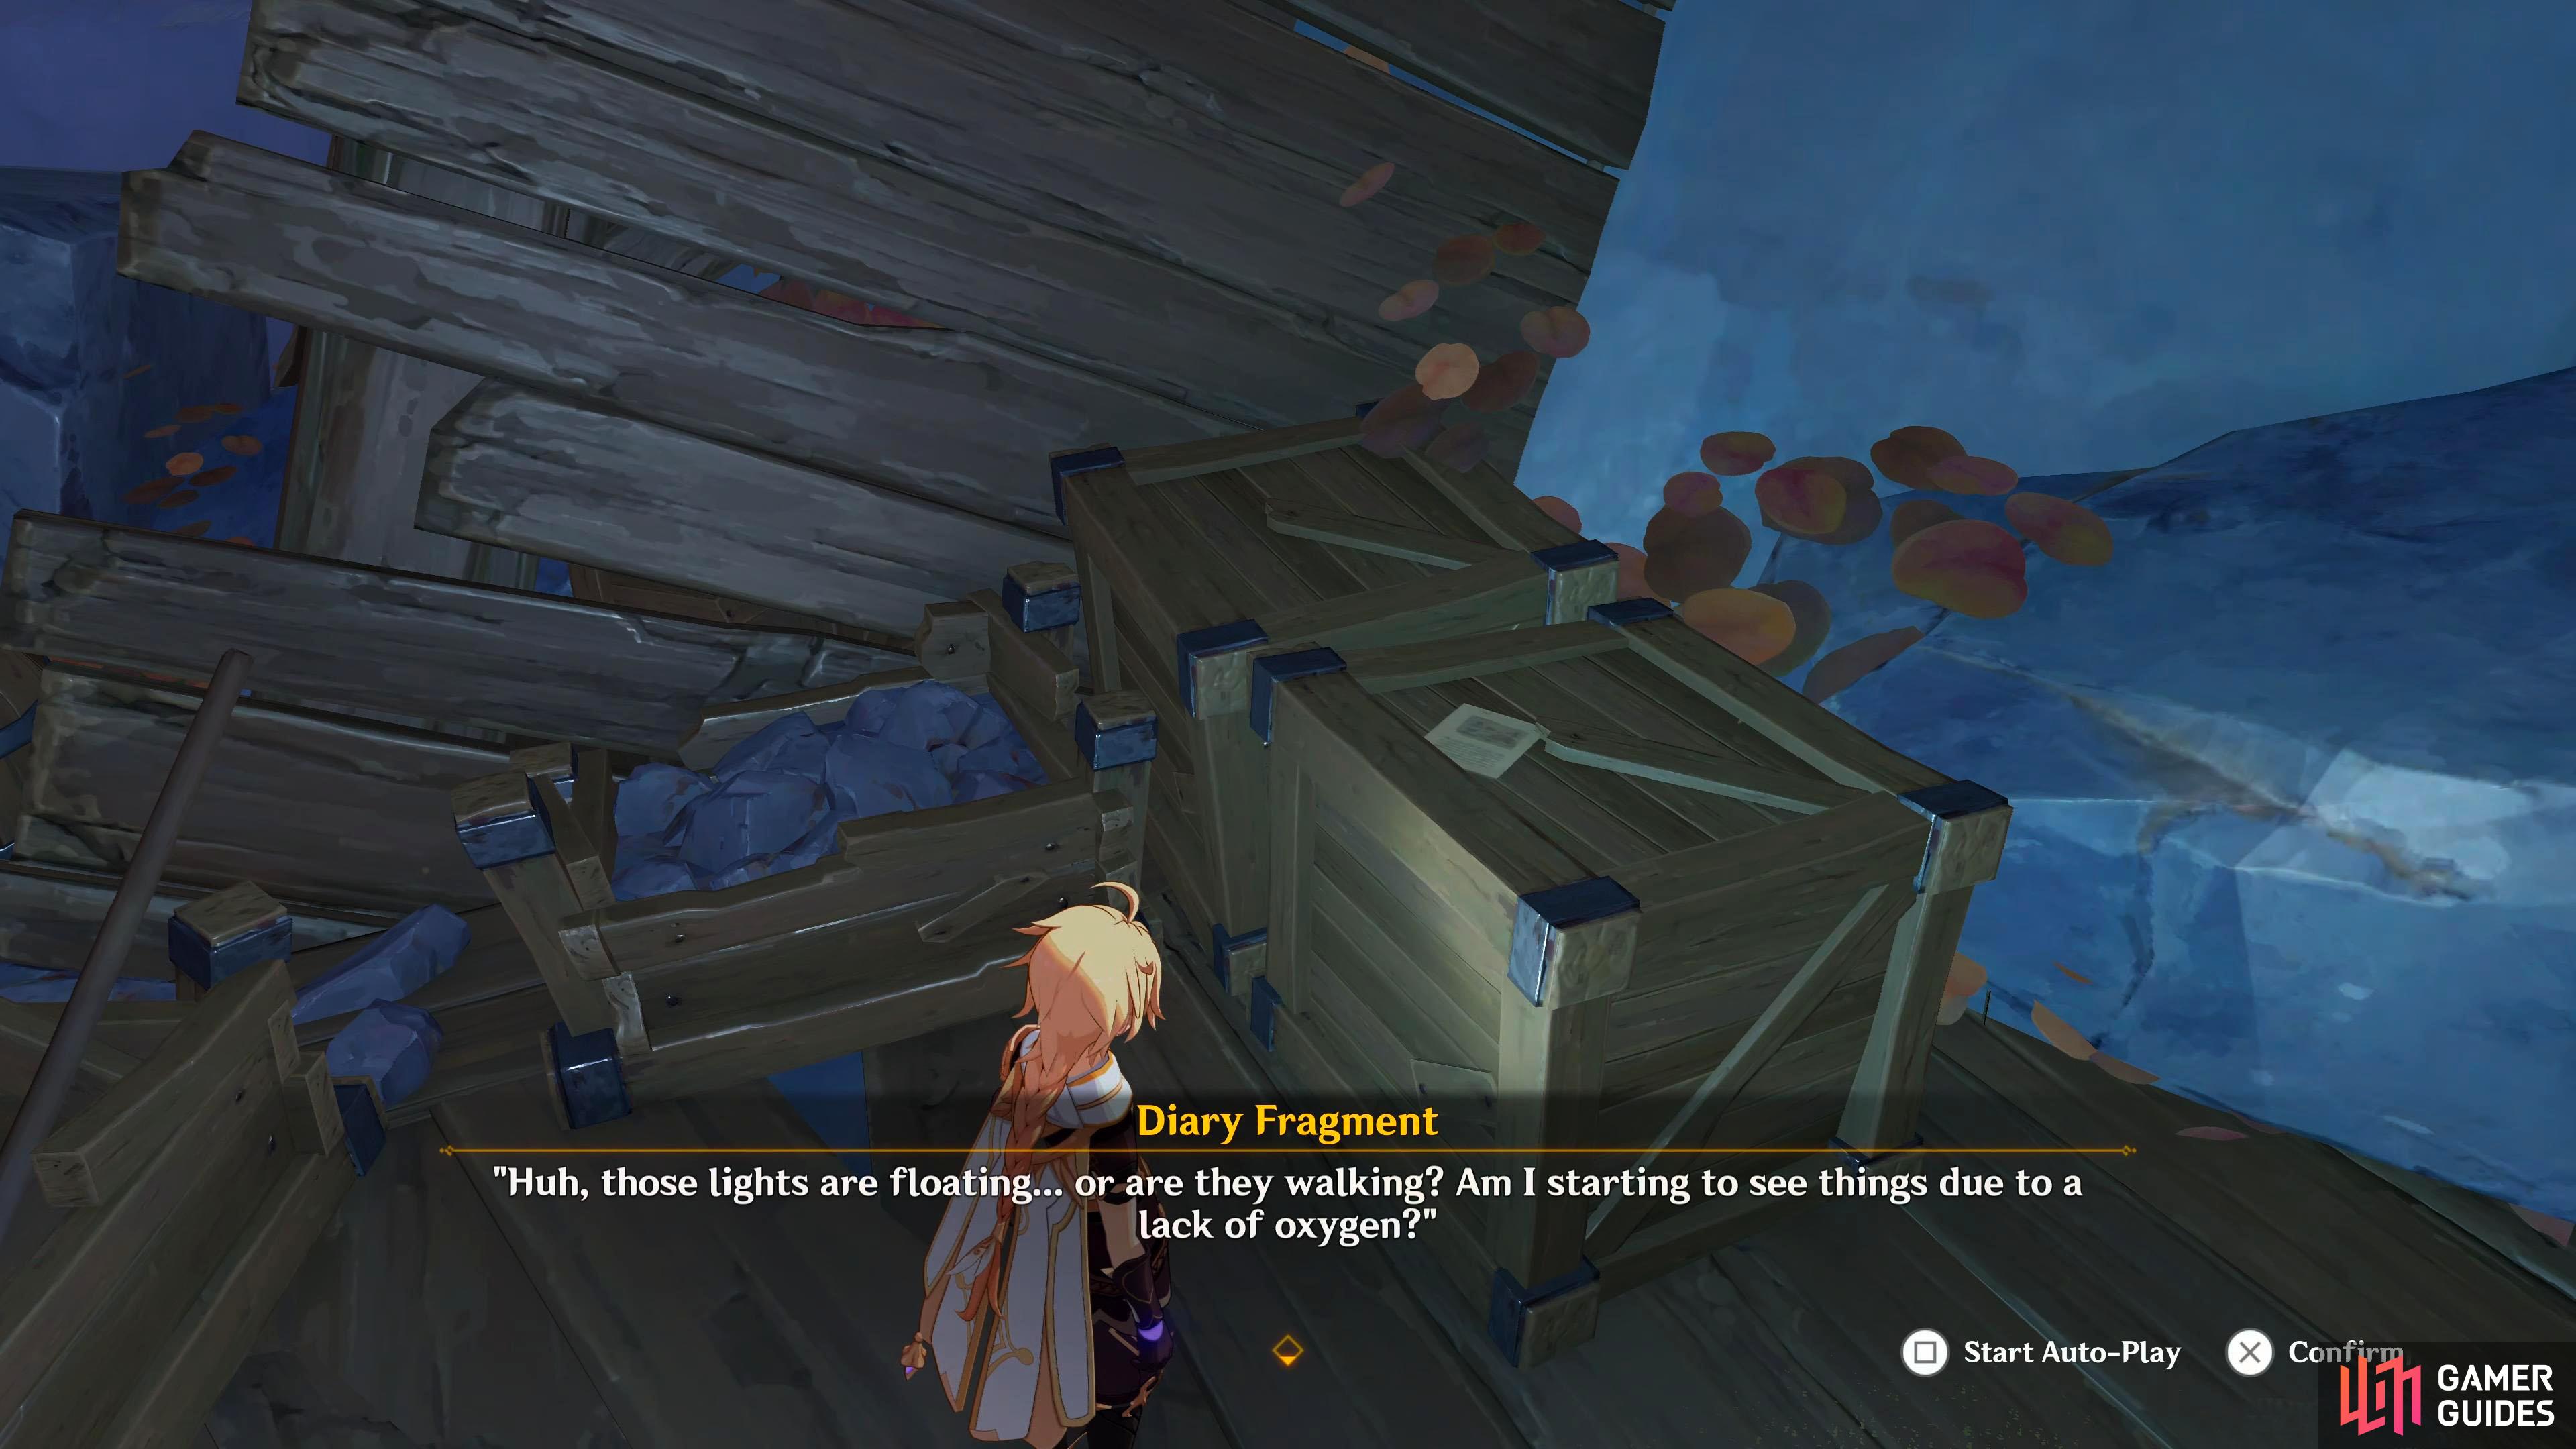 The first Diary Fragment can be found on the crates near the purple goo.